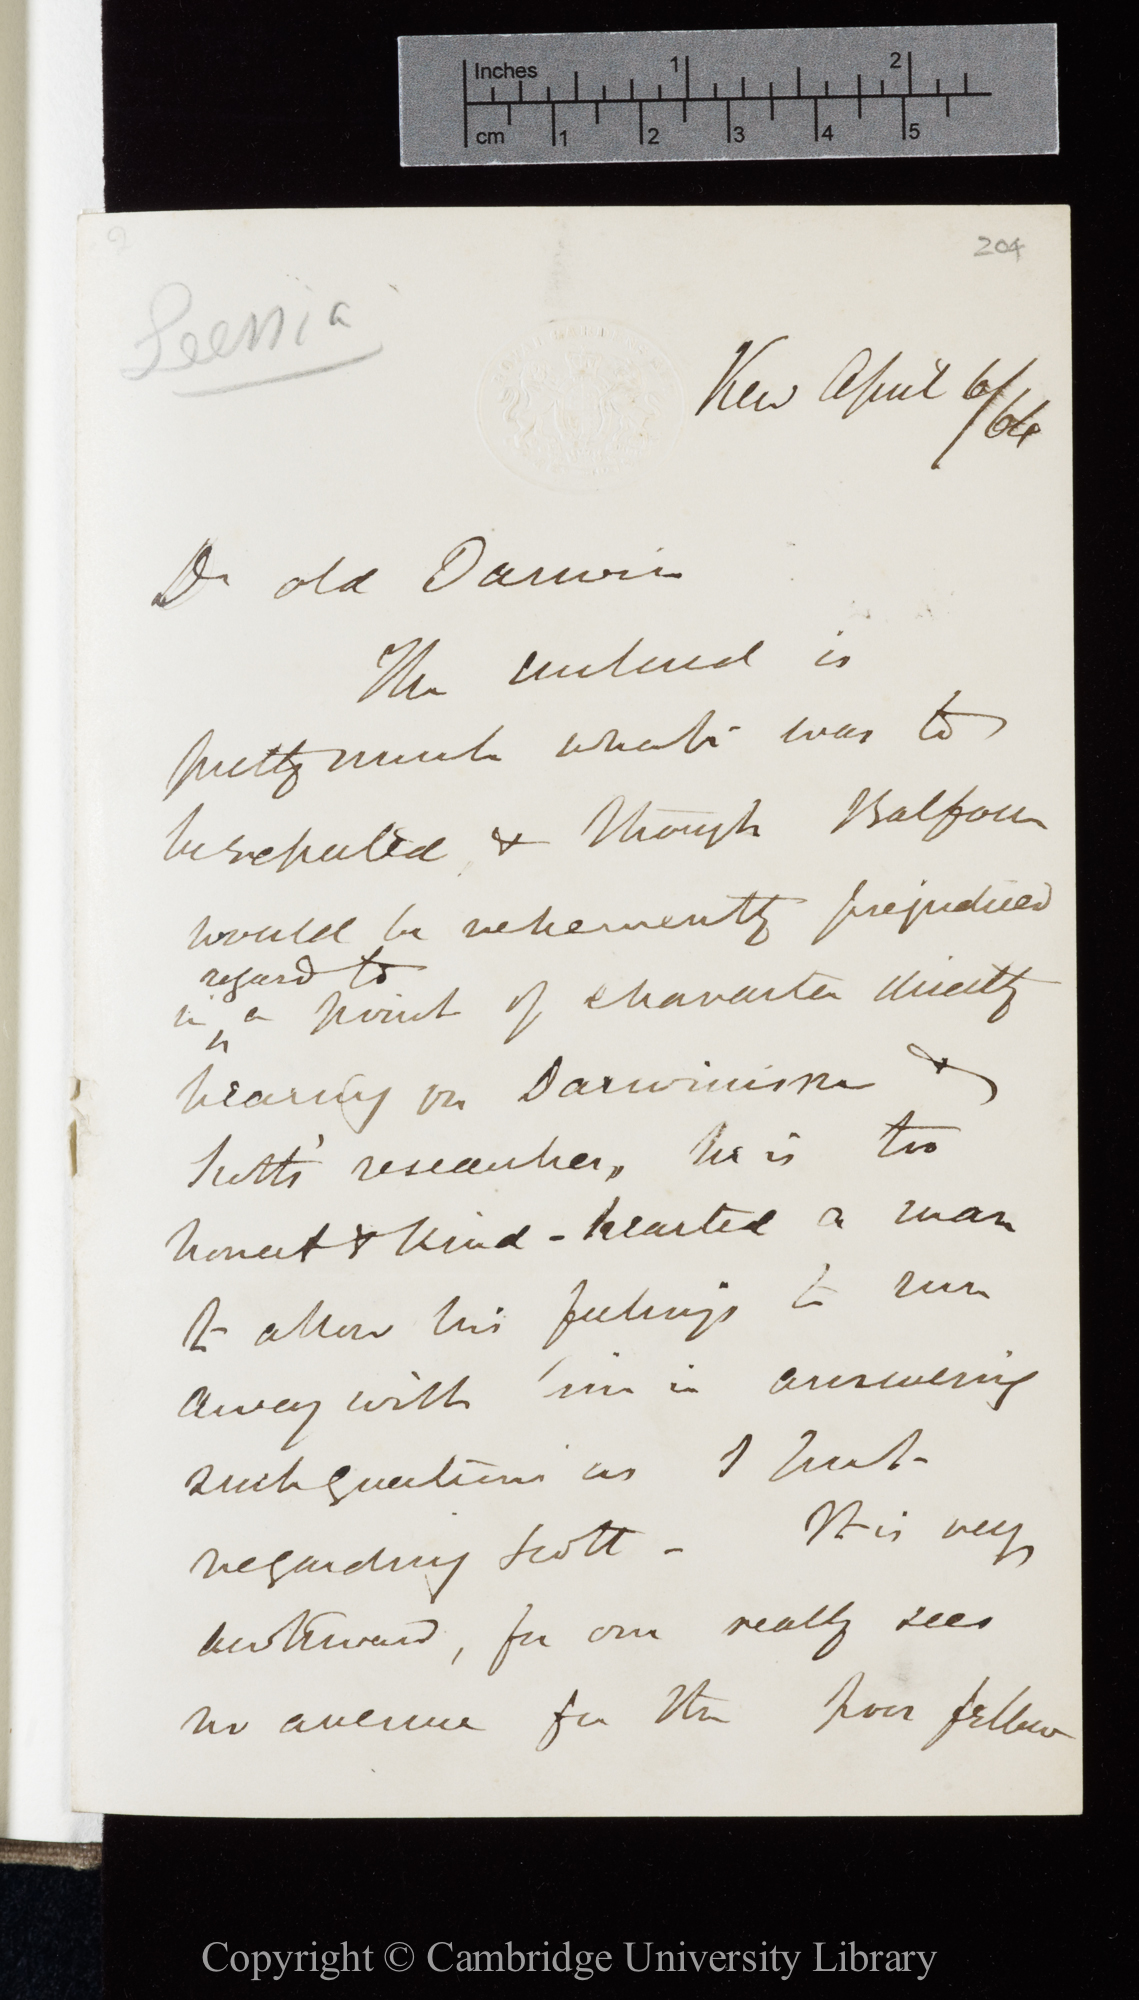 Letter from J. D. Hooker to C. R. Darwin   6 April 1864